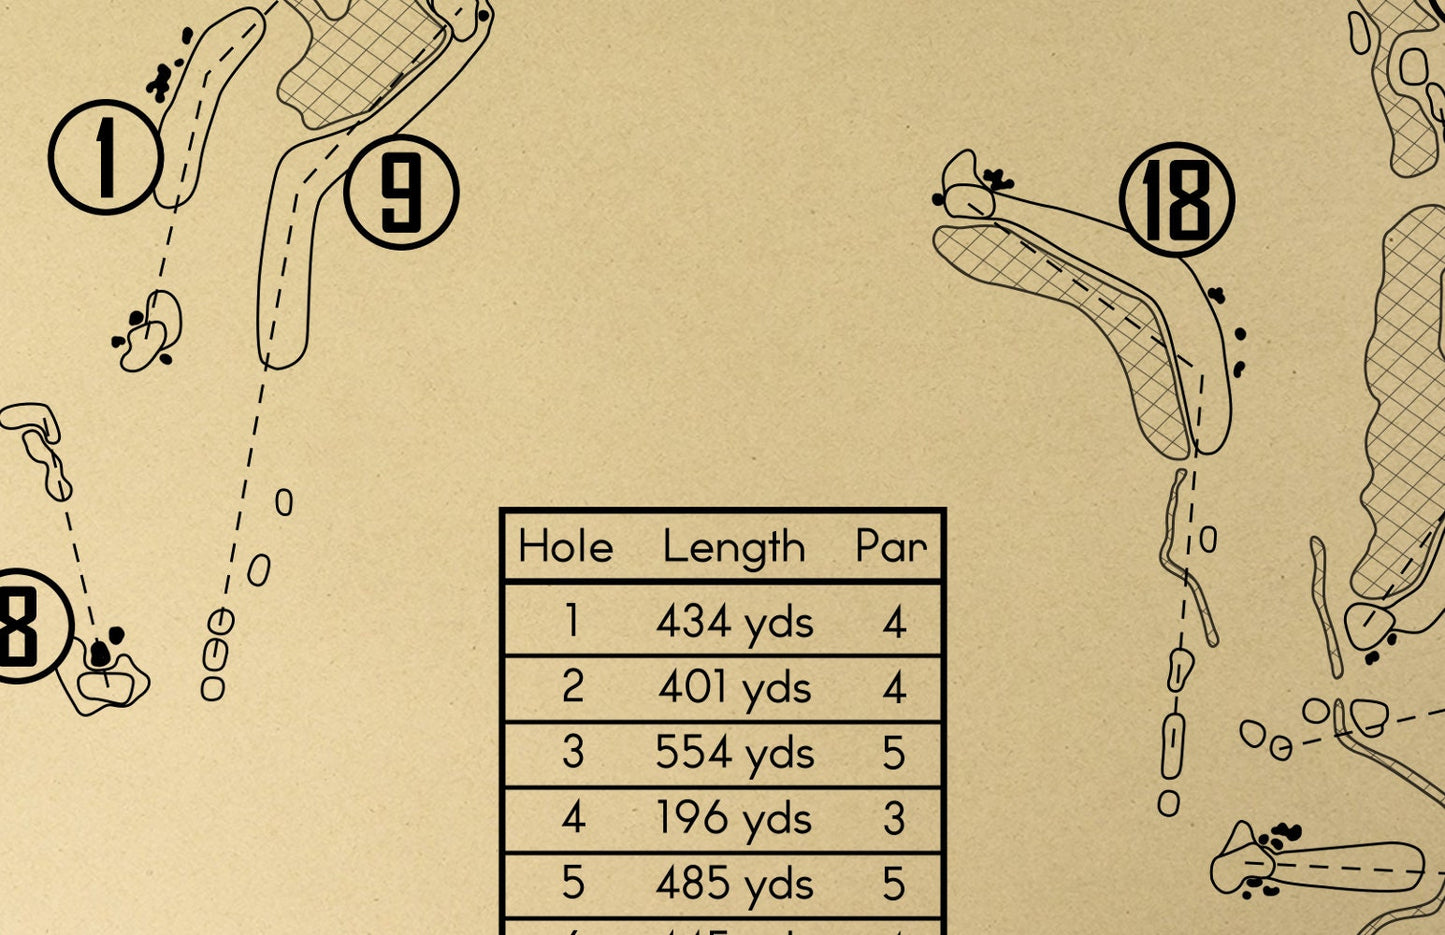 TPC Southwind Golf Course Outline (Print)